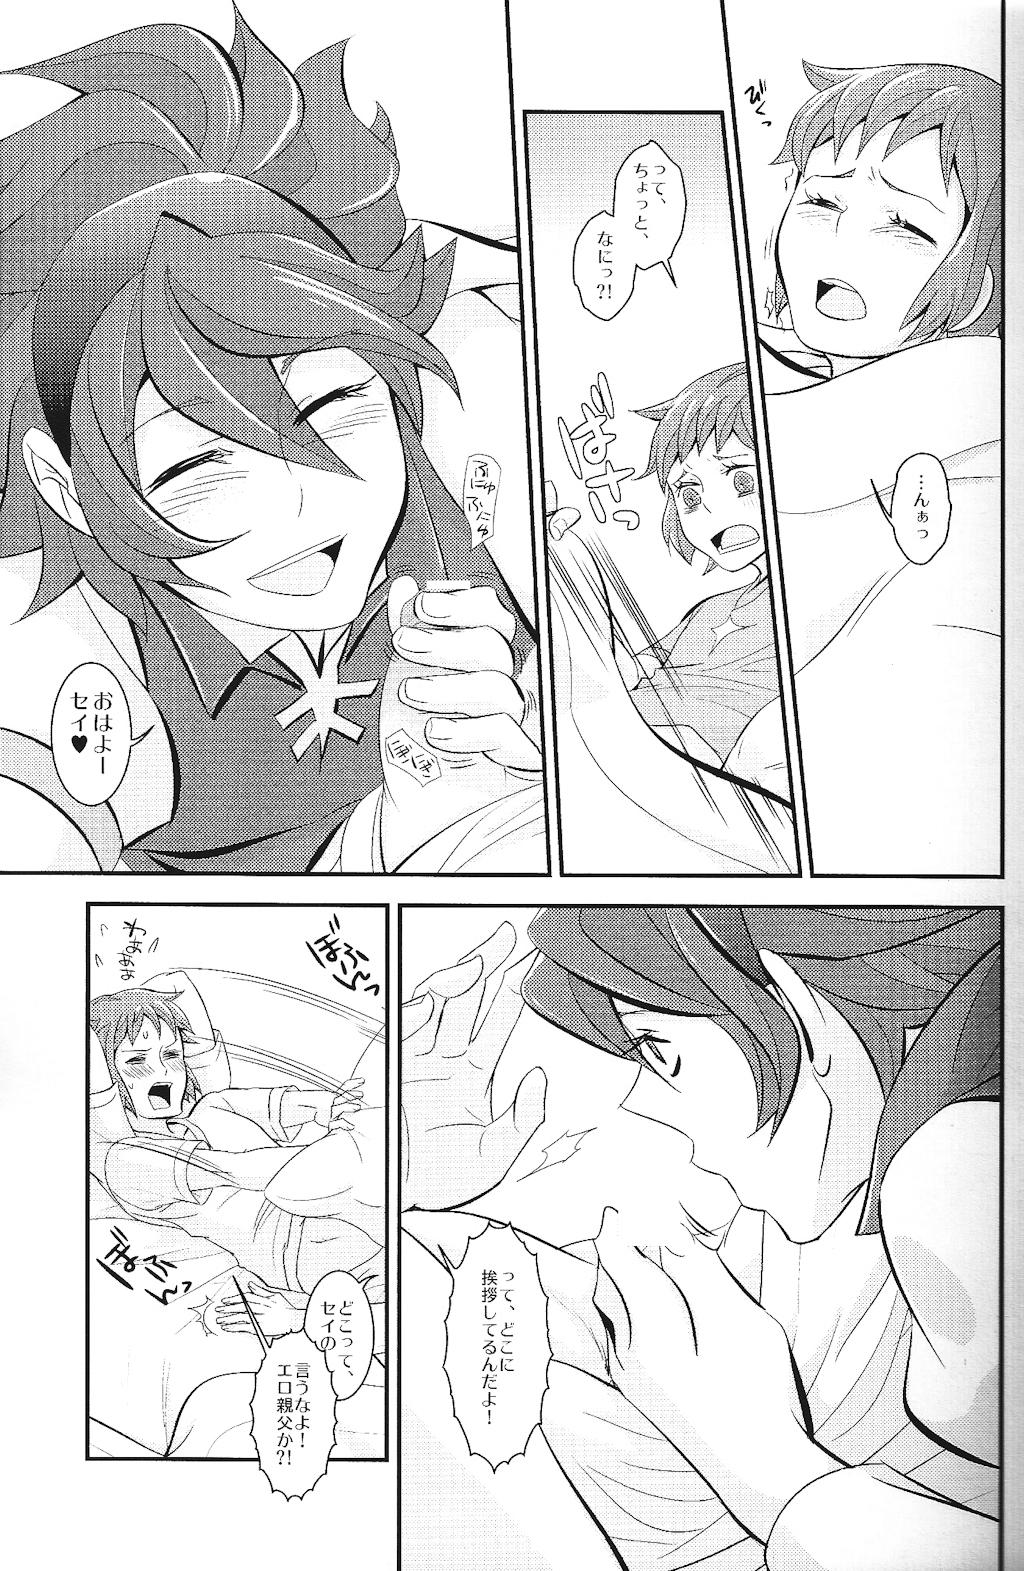 Ball Busting Date, ore no mono - Gundam build fighters Hot Naked Women - Page 4